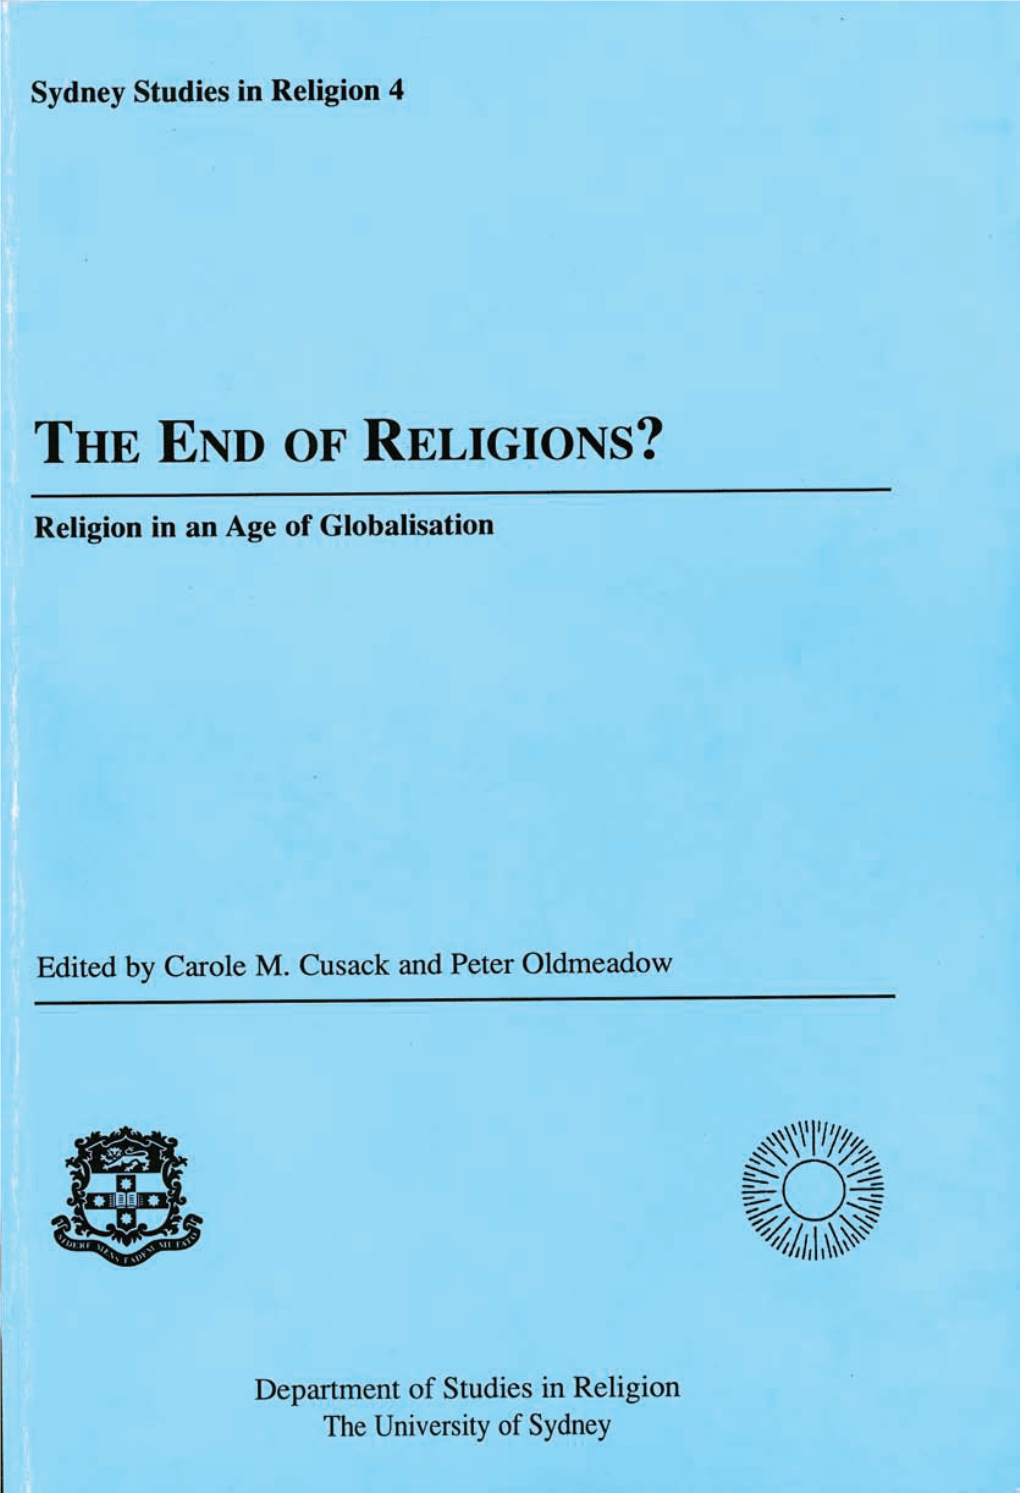 The End of Religions?